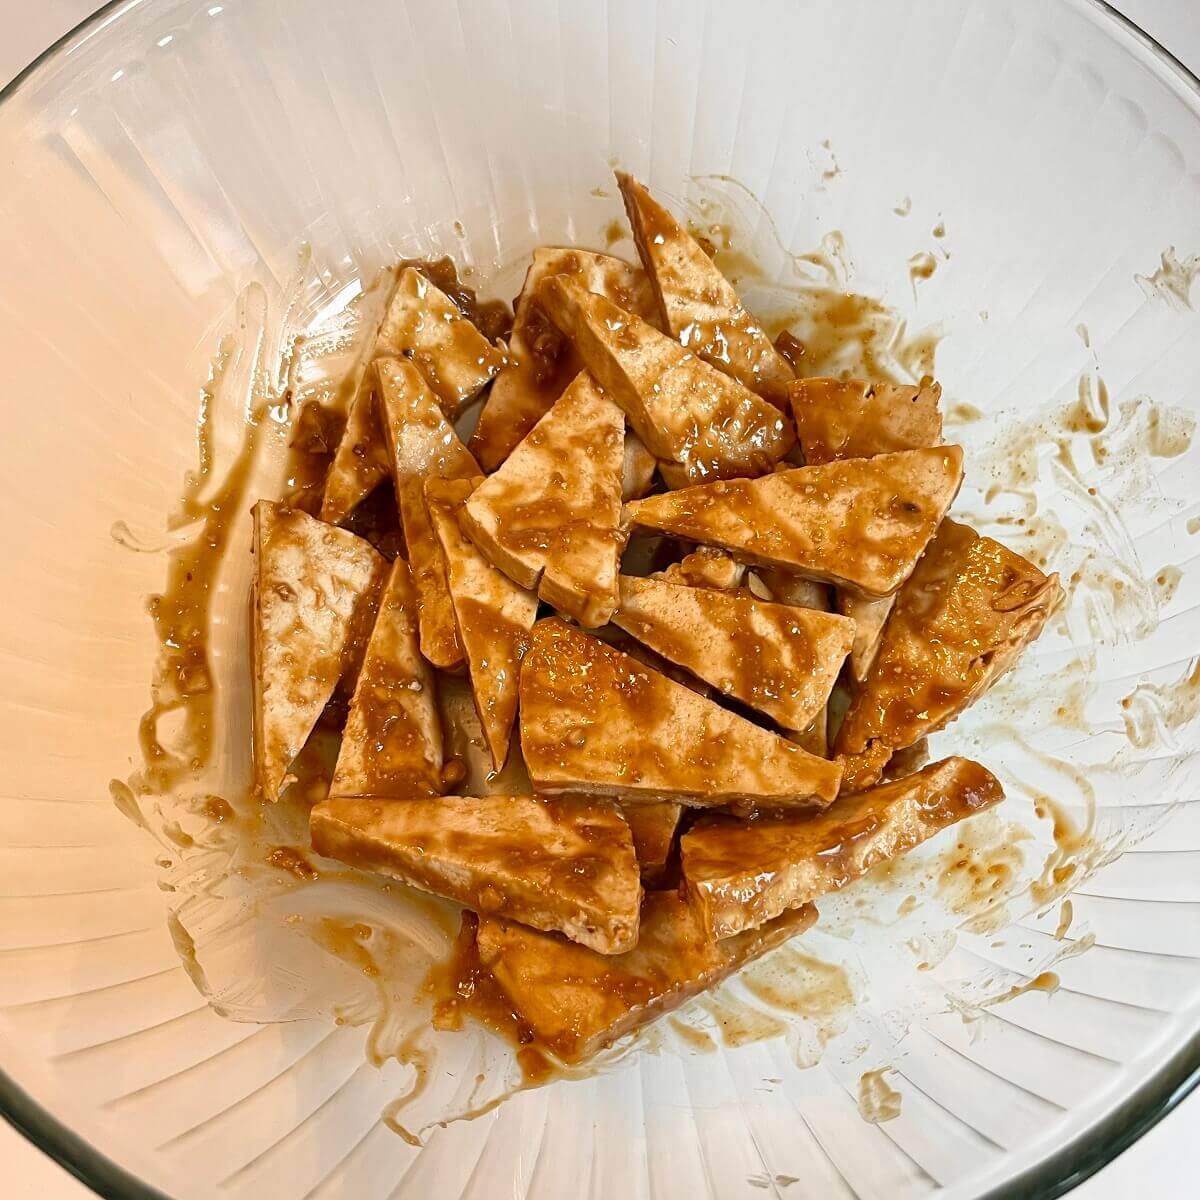 Tofu marinating in a large glass bowl.